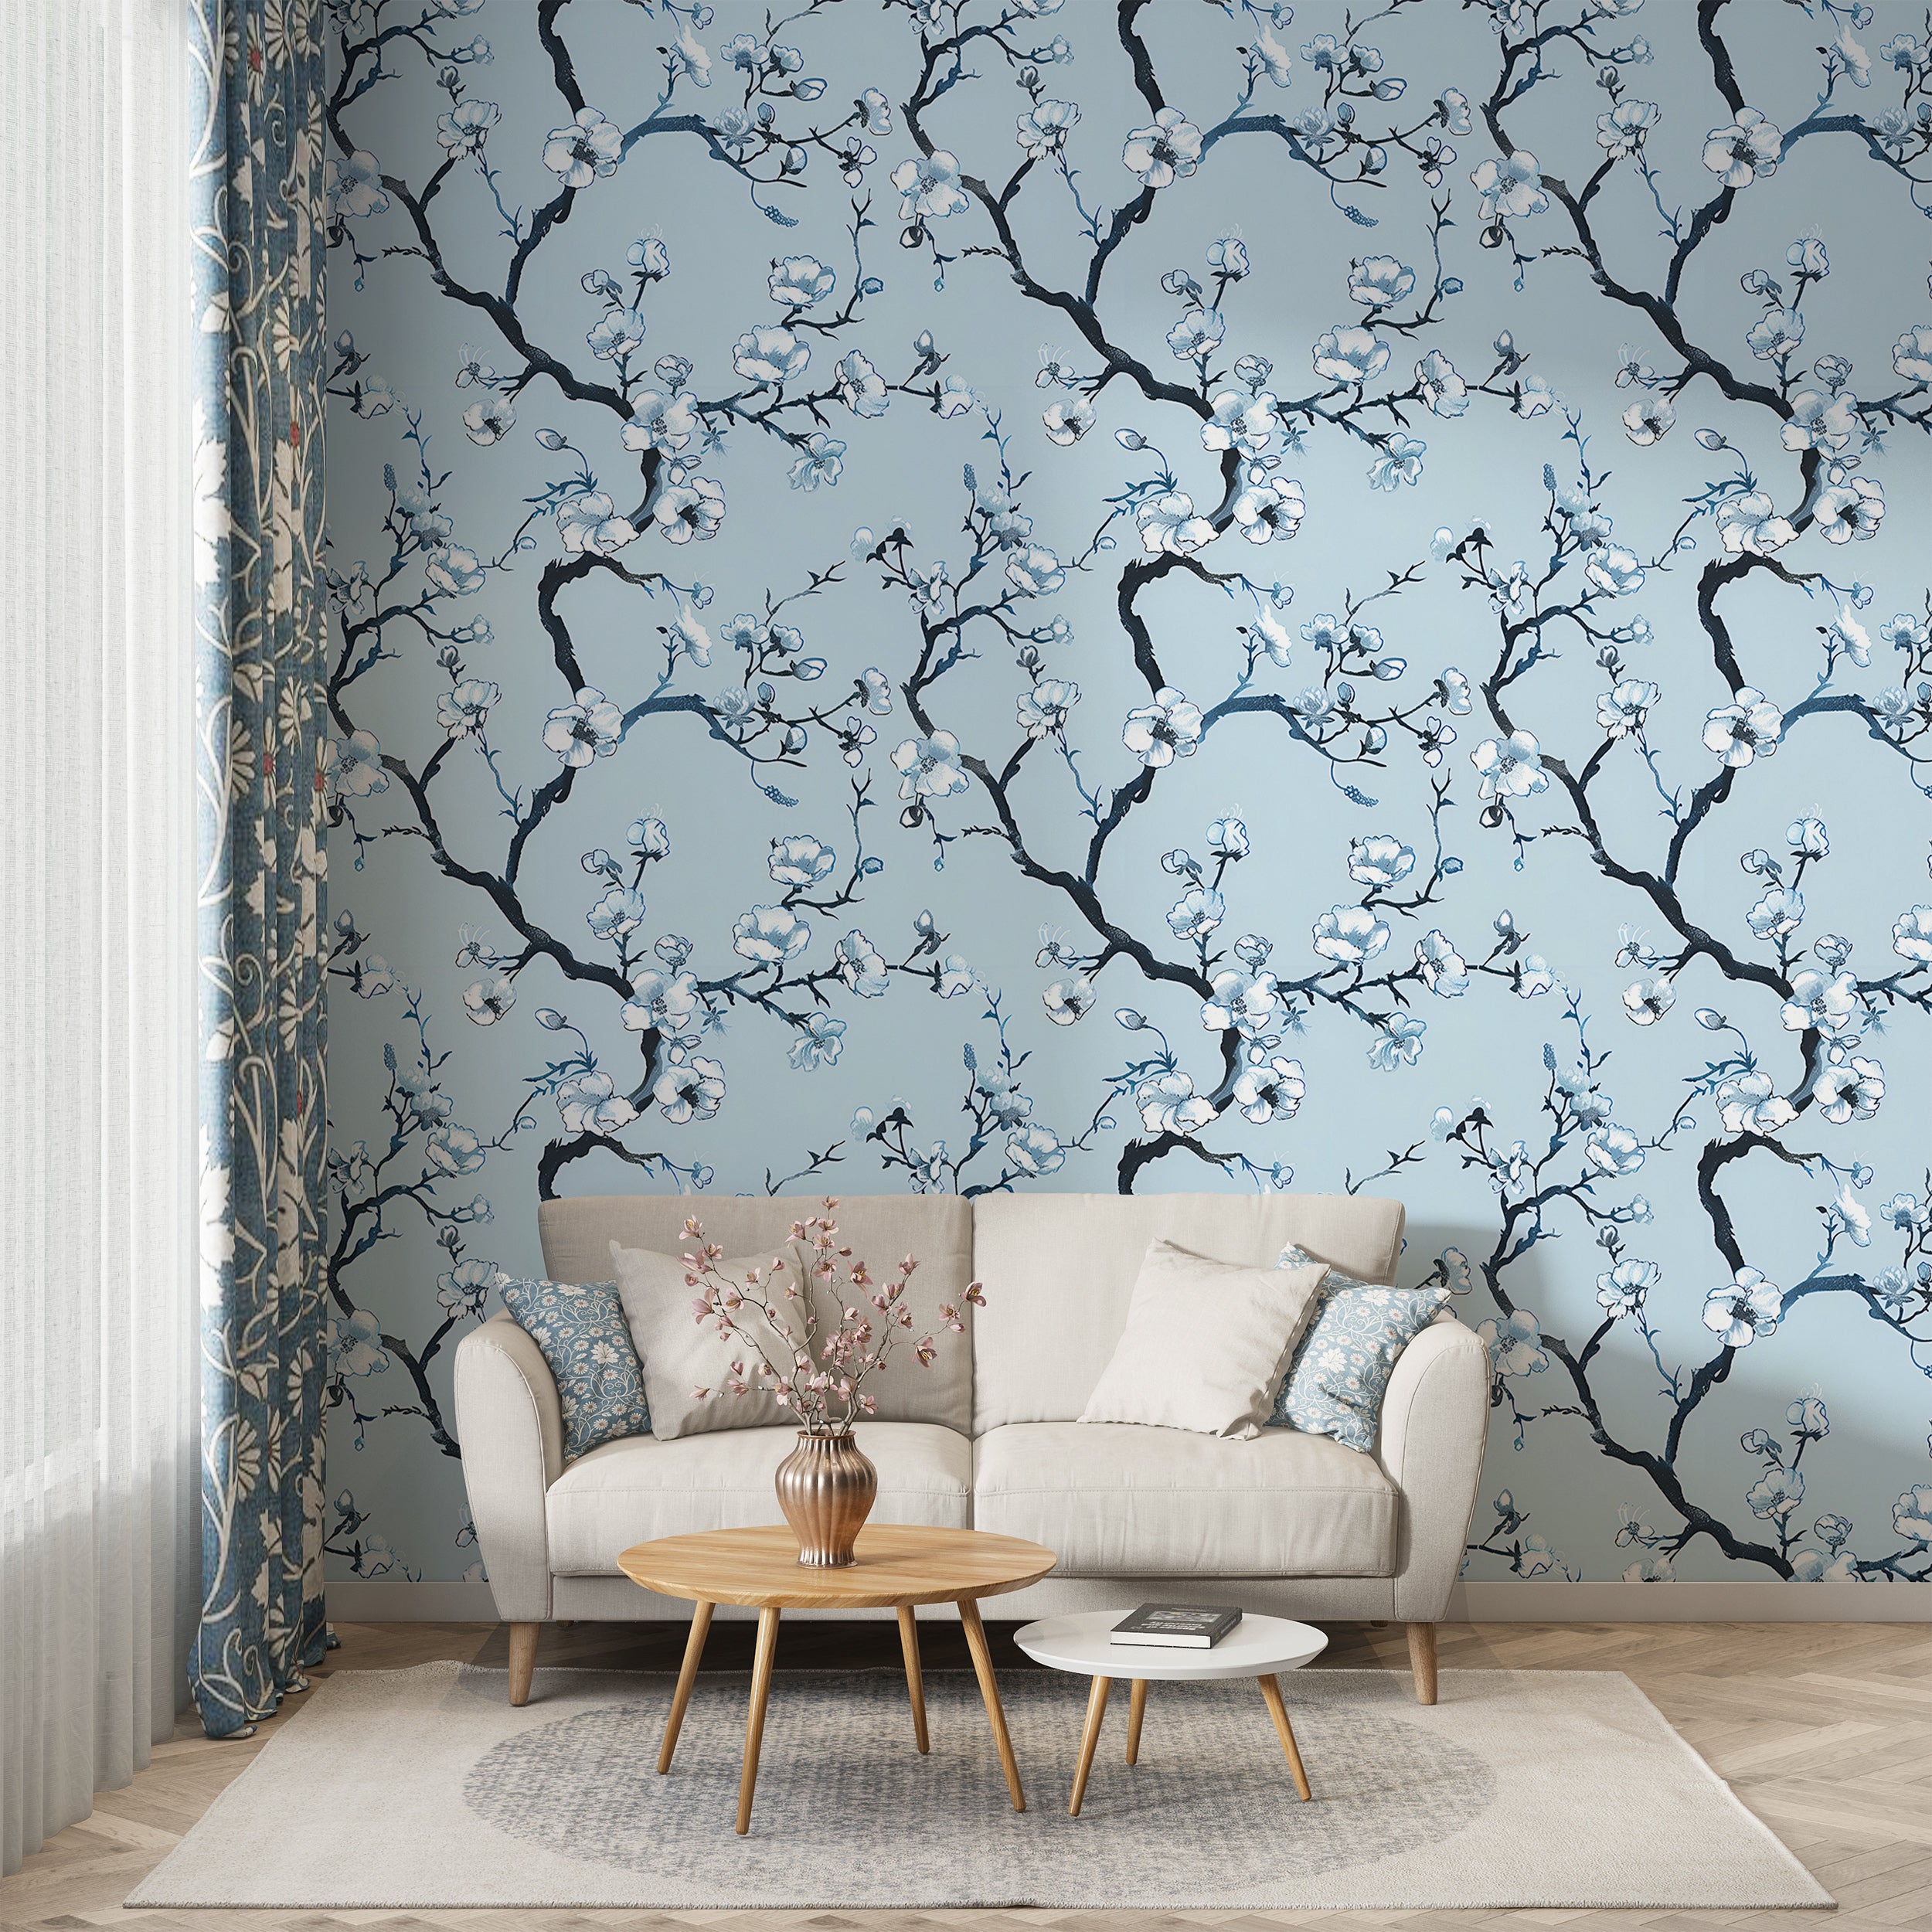 Delicate Blue Floral Wallpaper, Peel and Stick Blossom Branches, Watercolor Light Botanical Wallpaper, Tree Flowers Wall Decor